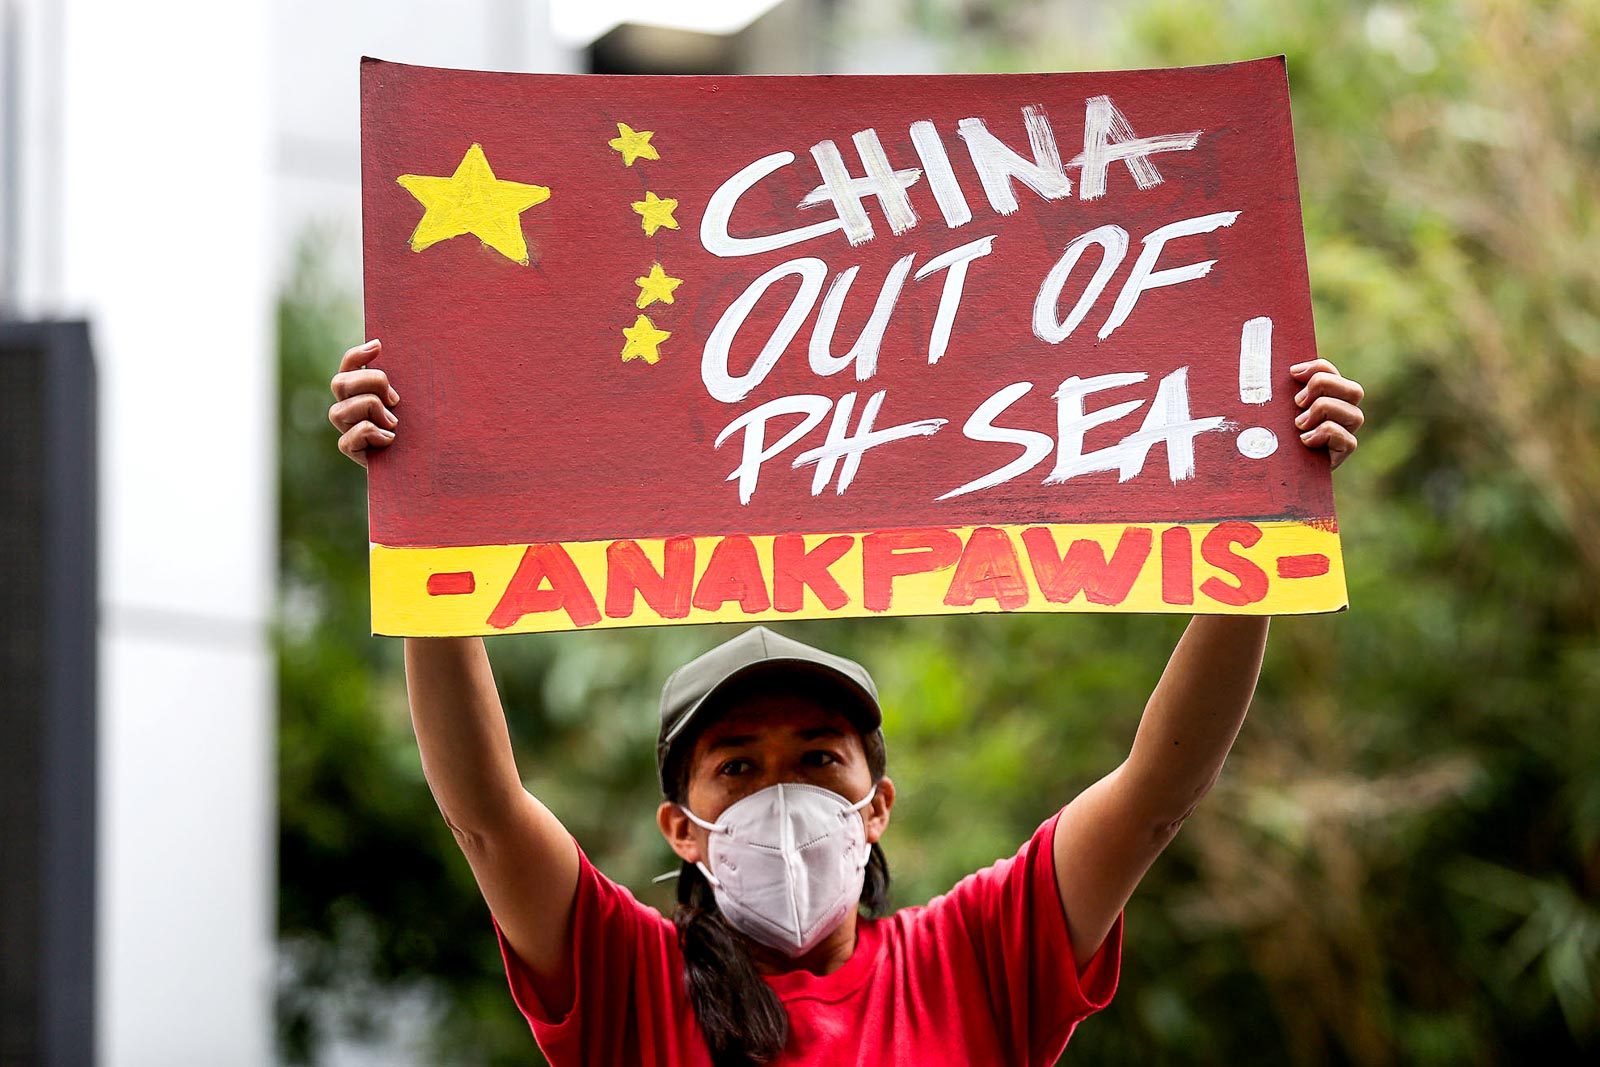 Scrapped West PH Sea oil talks with China give Marcos ‘clean slate’